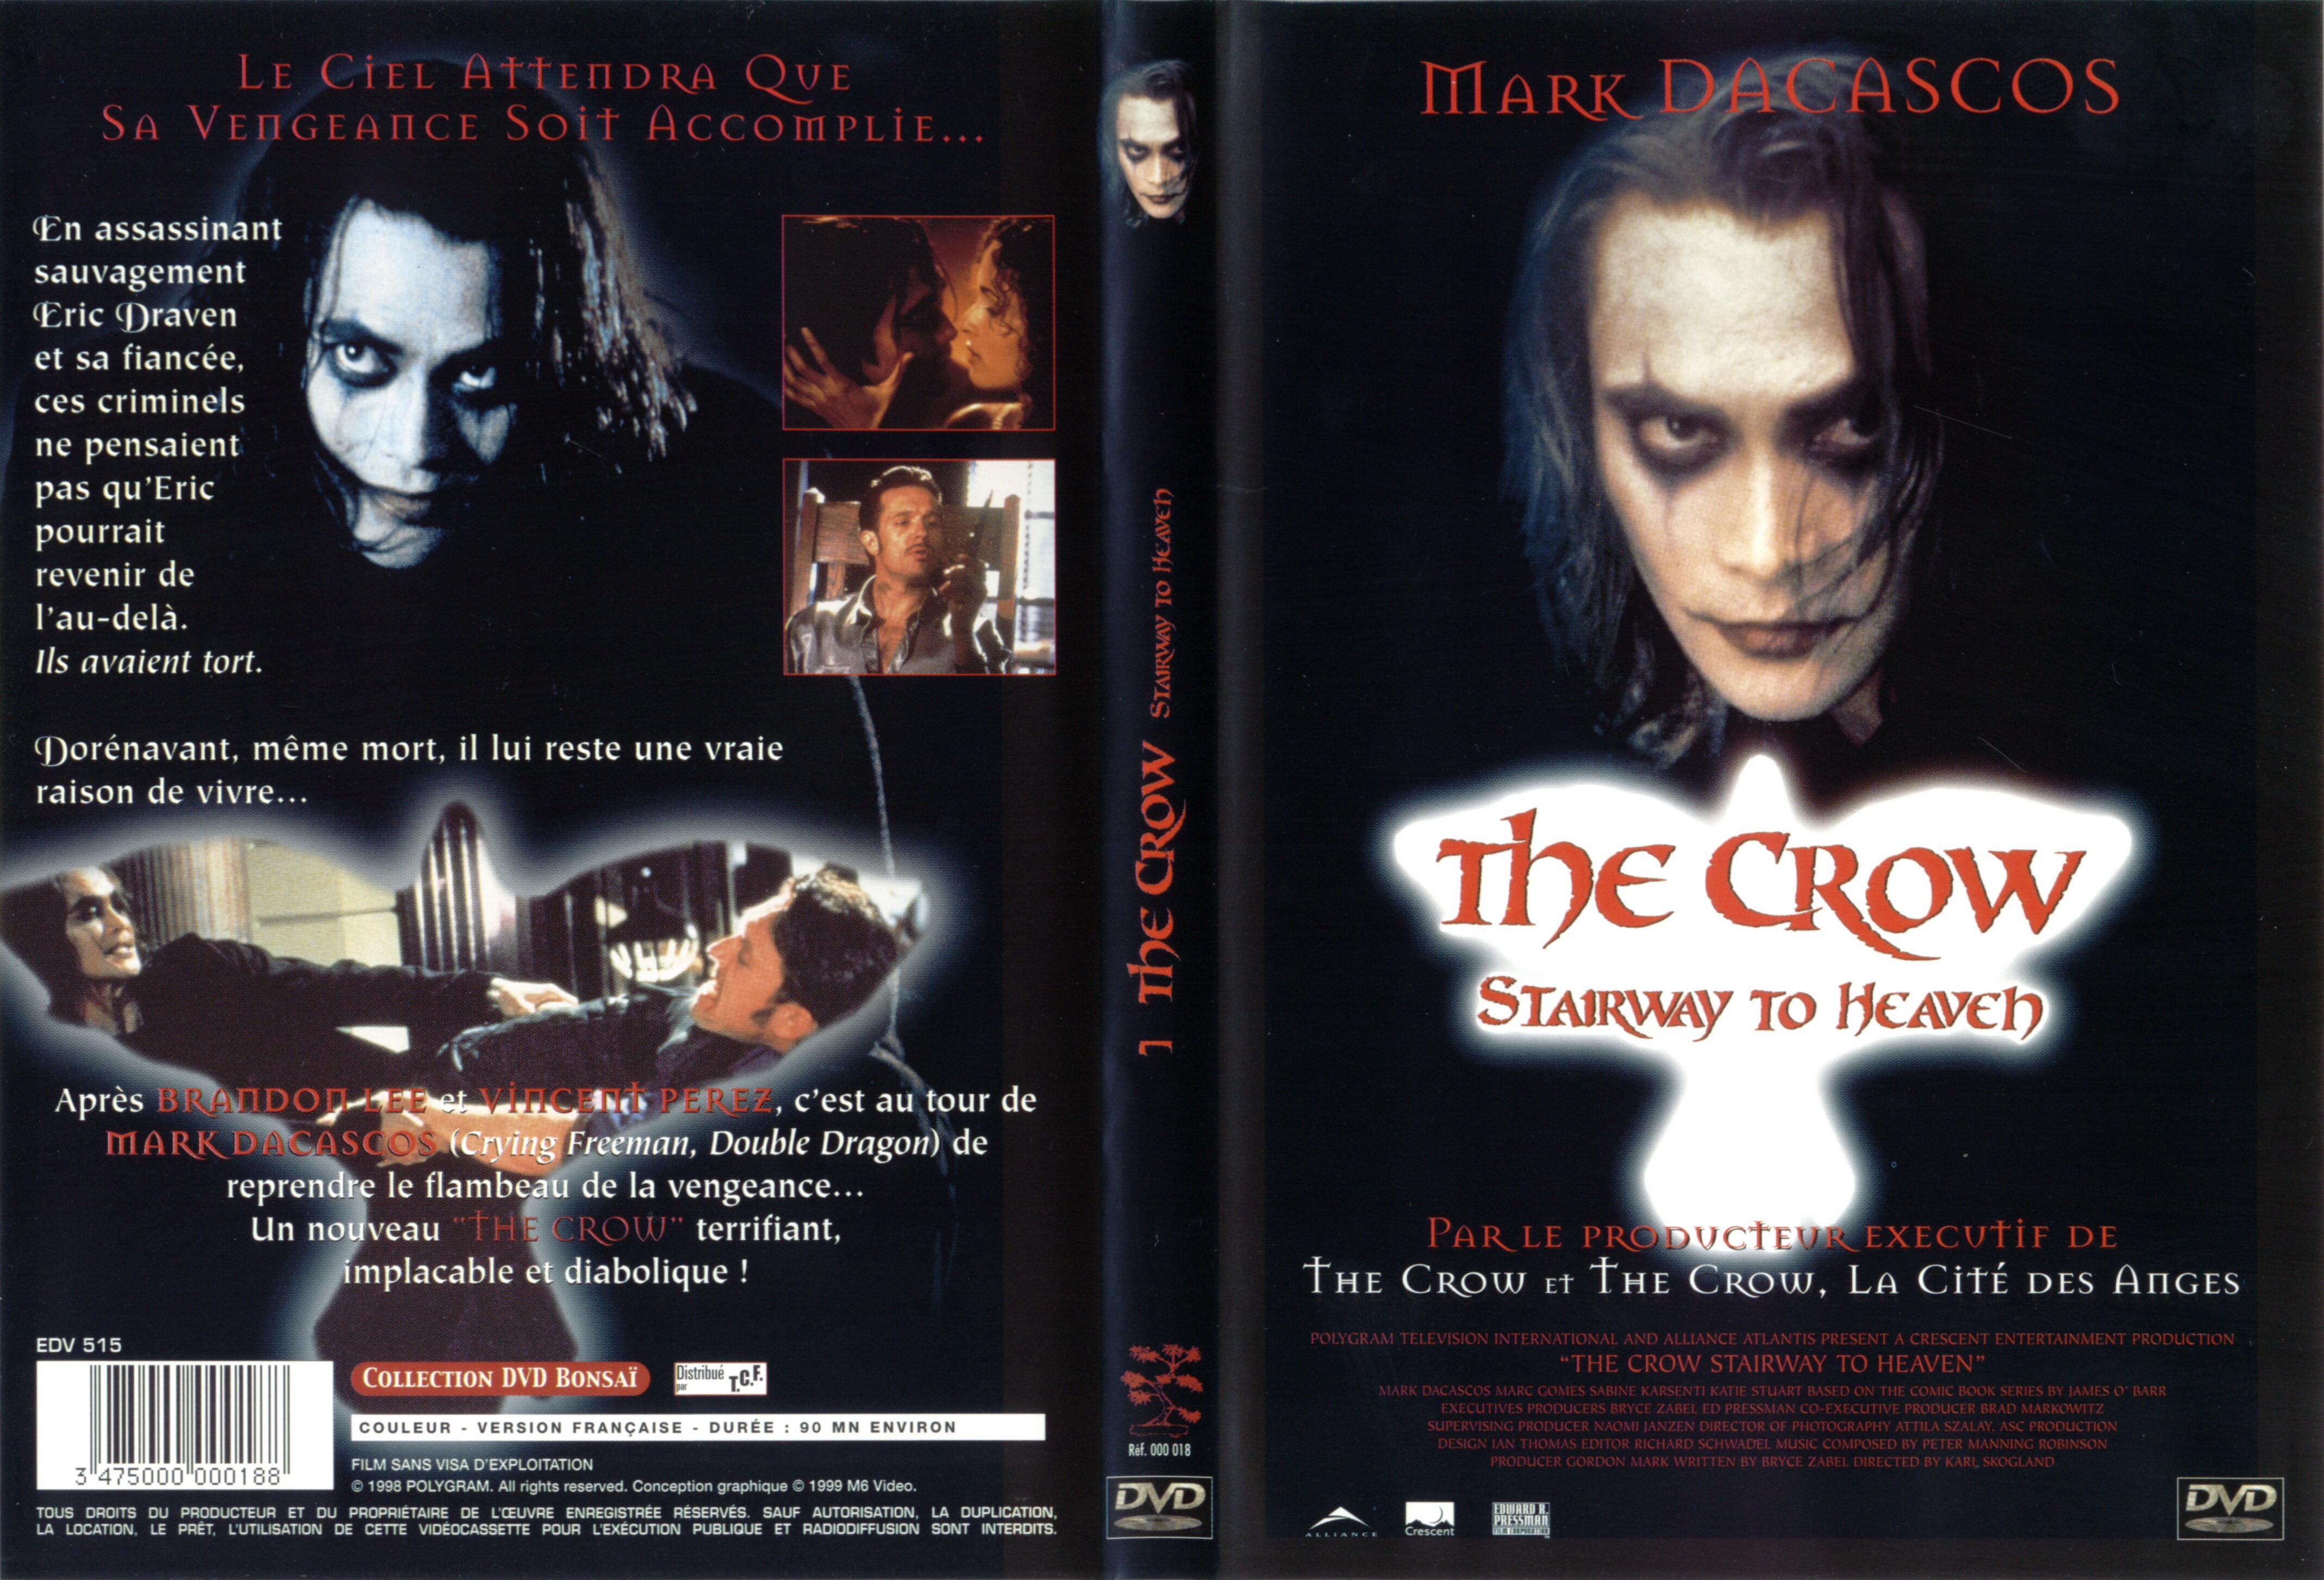 Jaquette DVD The crow stairway to heaven